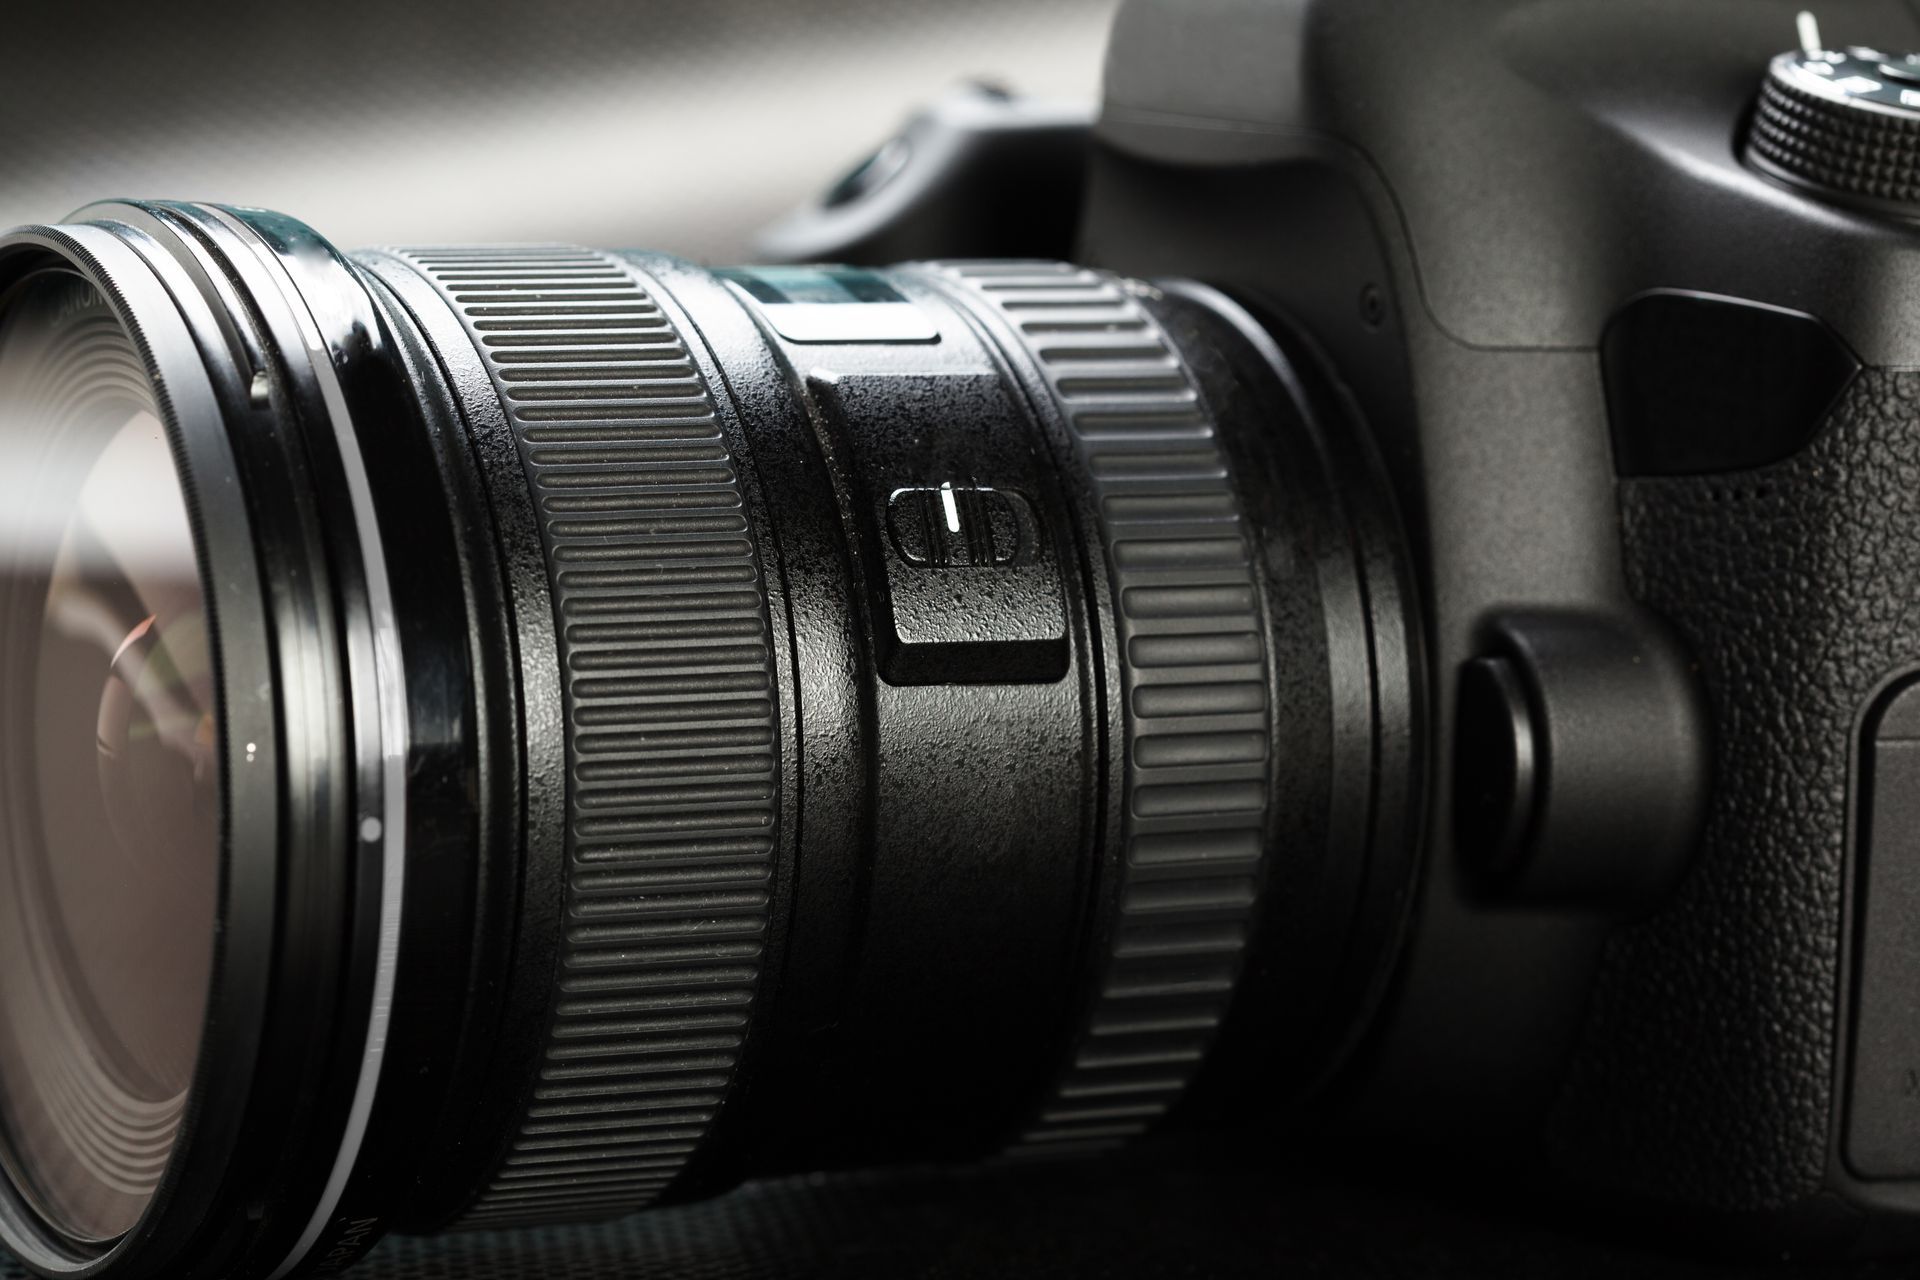 What Can Quality Photography Do for Your Business Website? Find Out With Lift Division.  